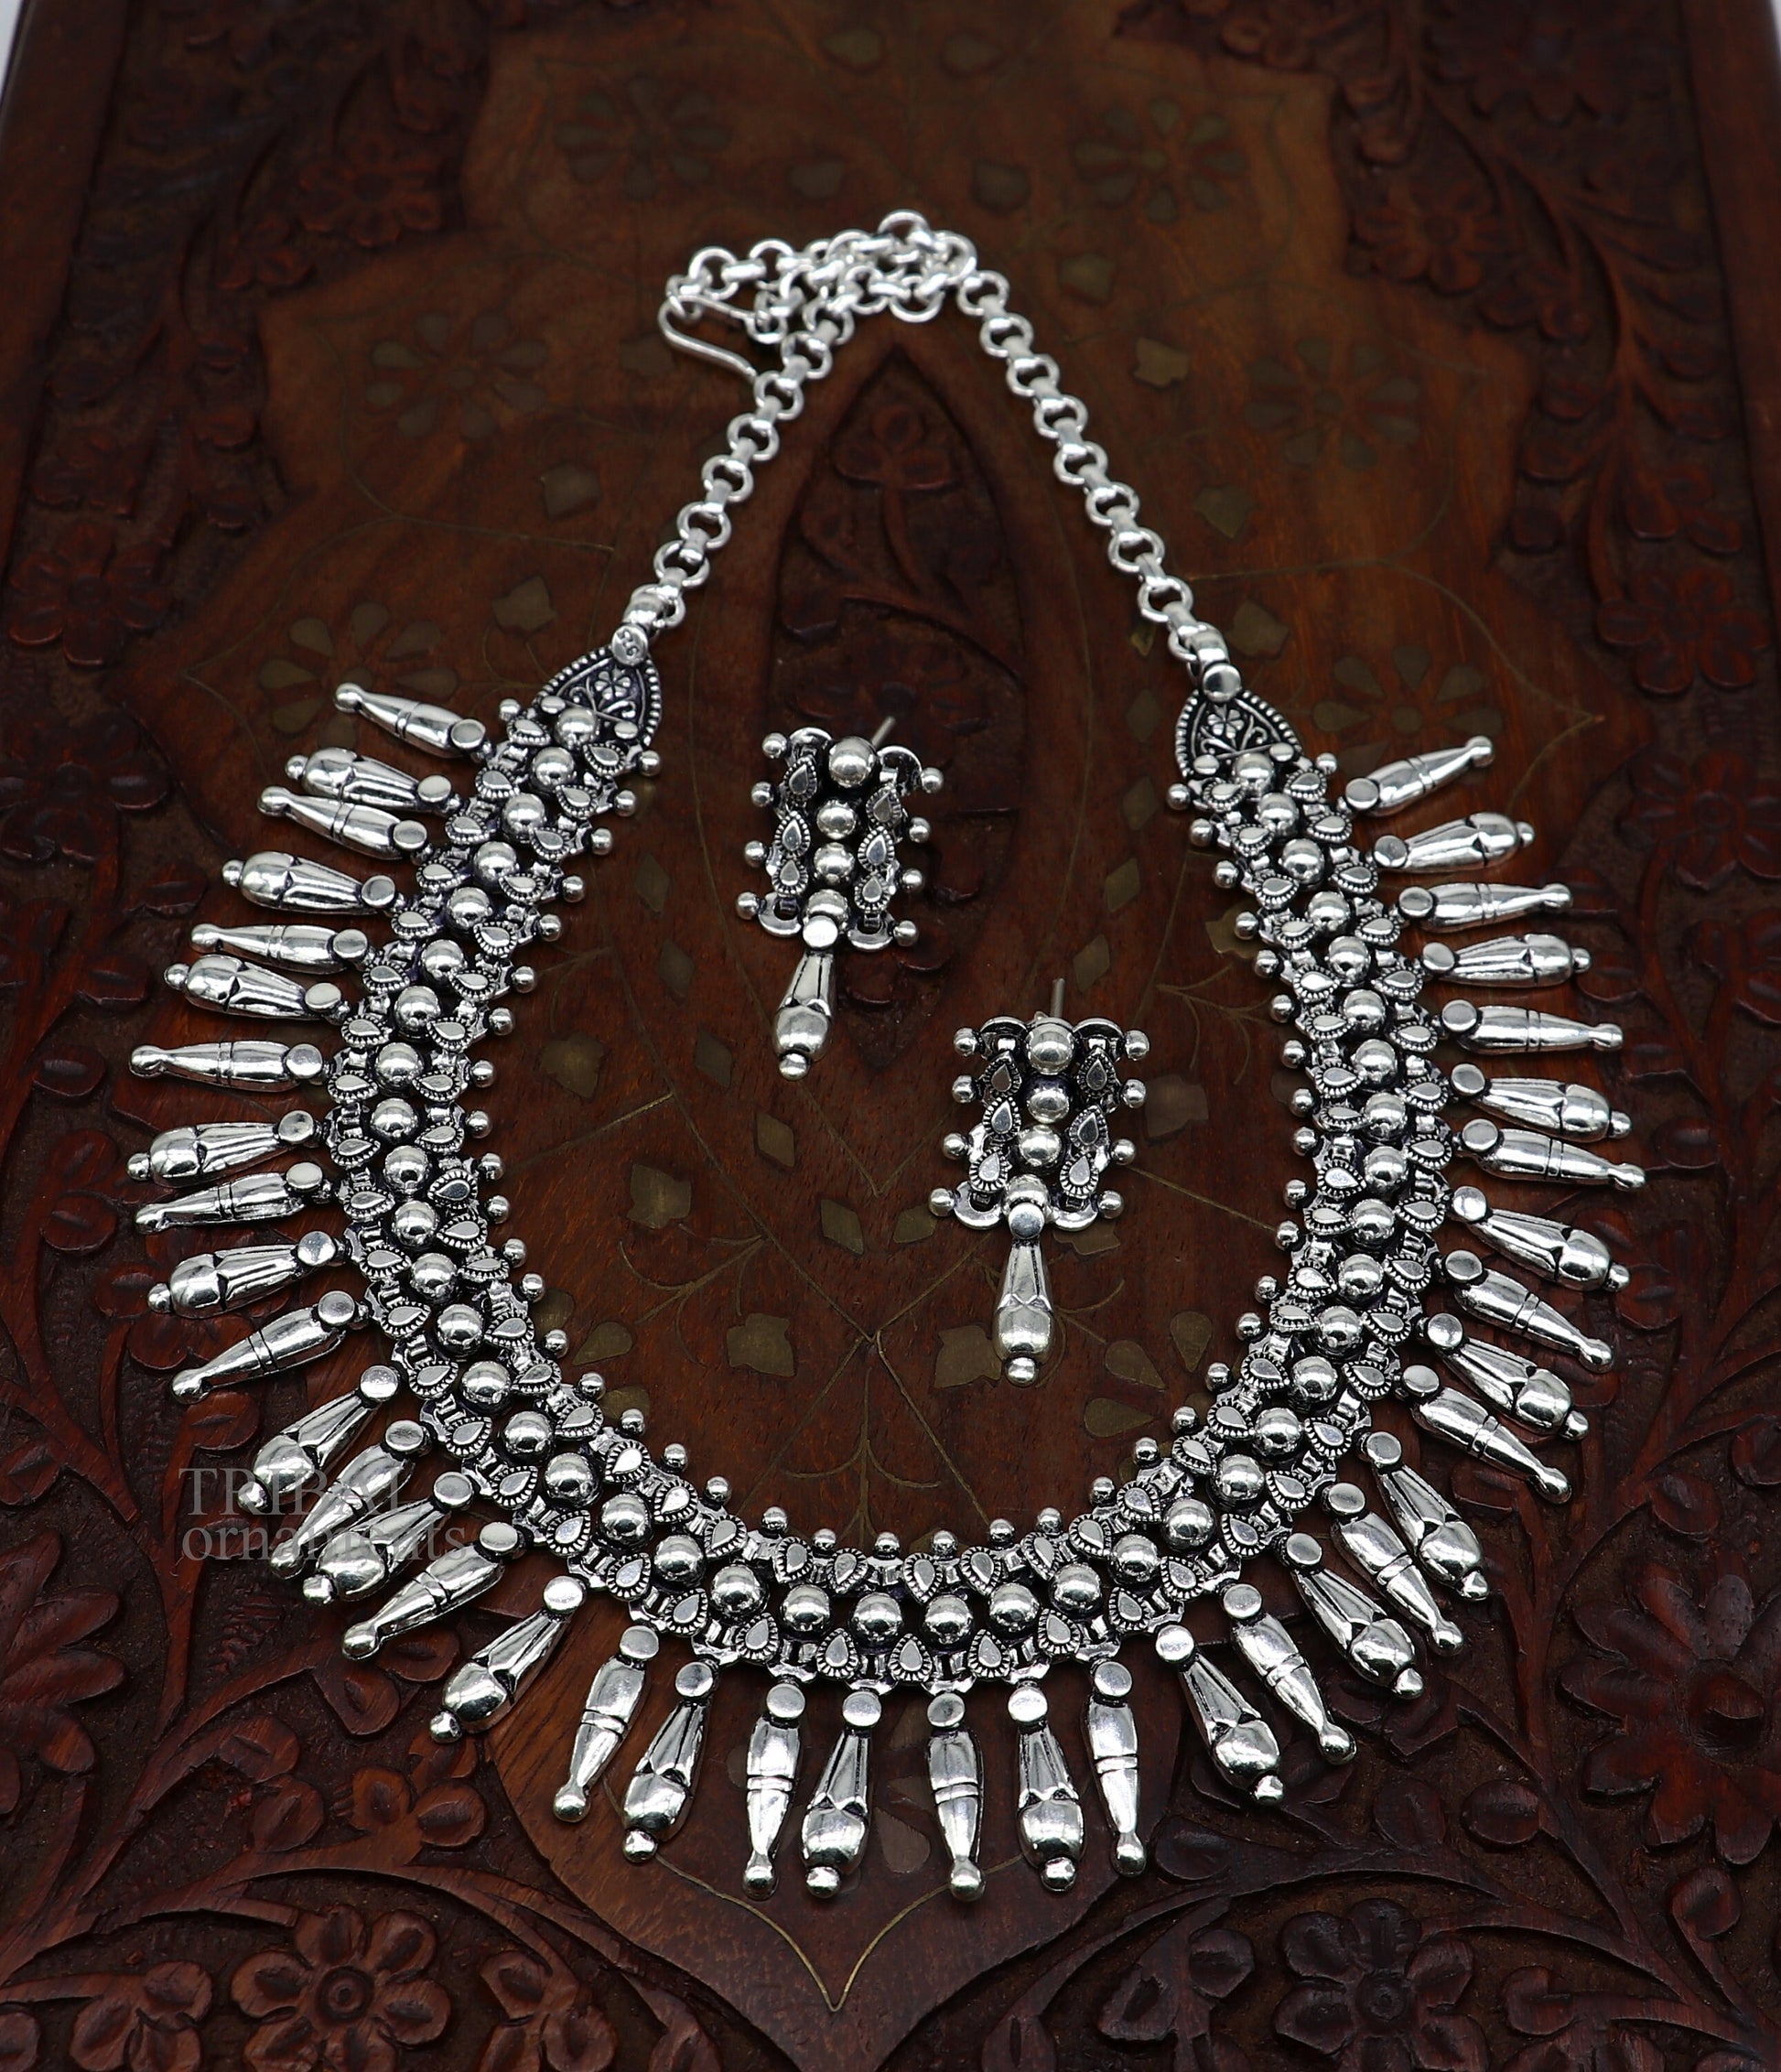 925 sterling silver handcrafted vintage design ethnic necklace, excellent wedding gifting tribal brides belly dance jewelry india nec293 - TRIBAL ORNAMENTS